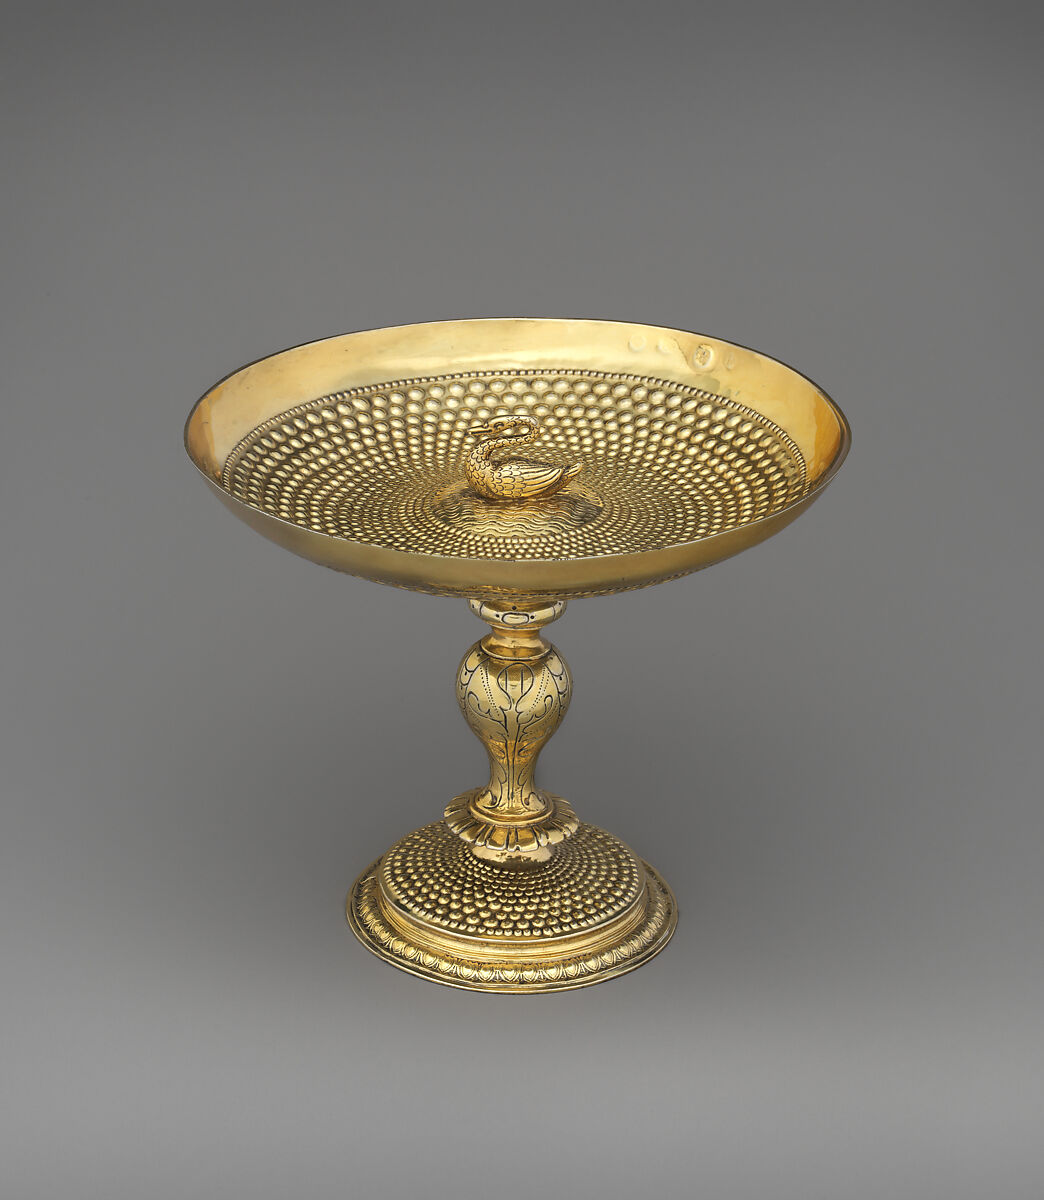 Wine Cup on a High Foot (Tazza), Gilded silver, British, London 